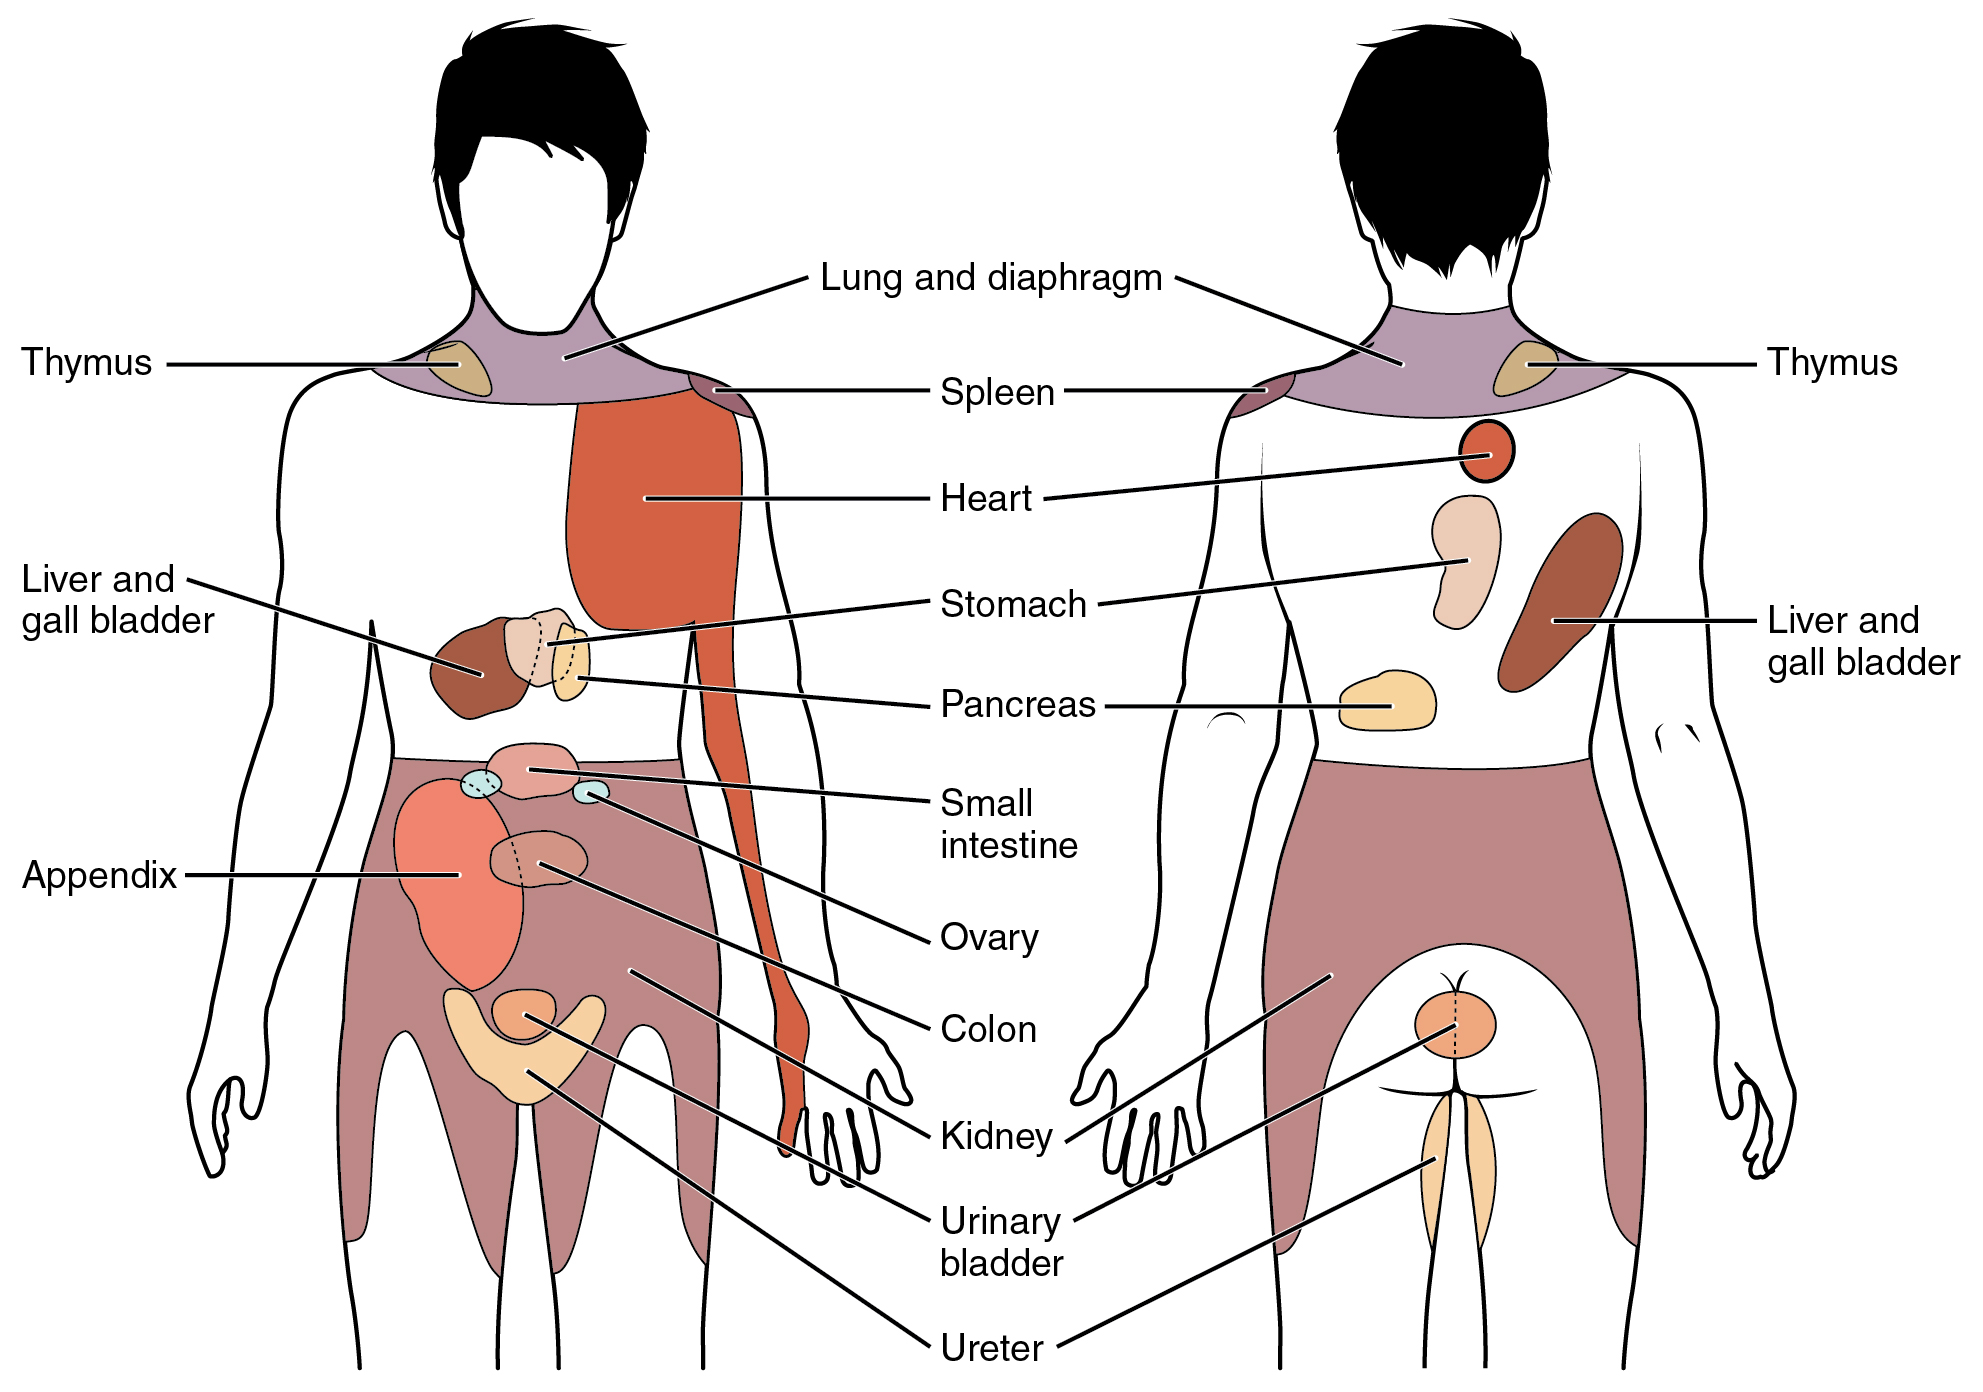 Body regions of referred pain connected to the involved organ. 